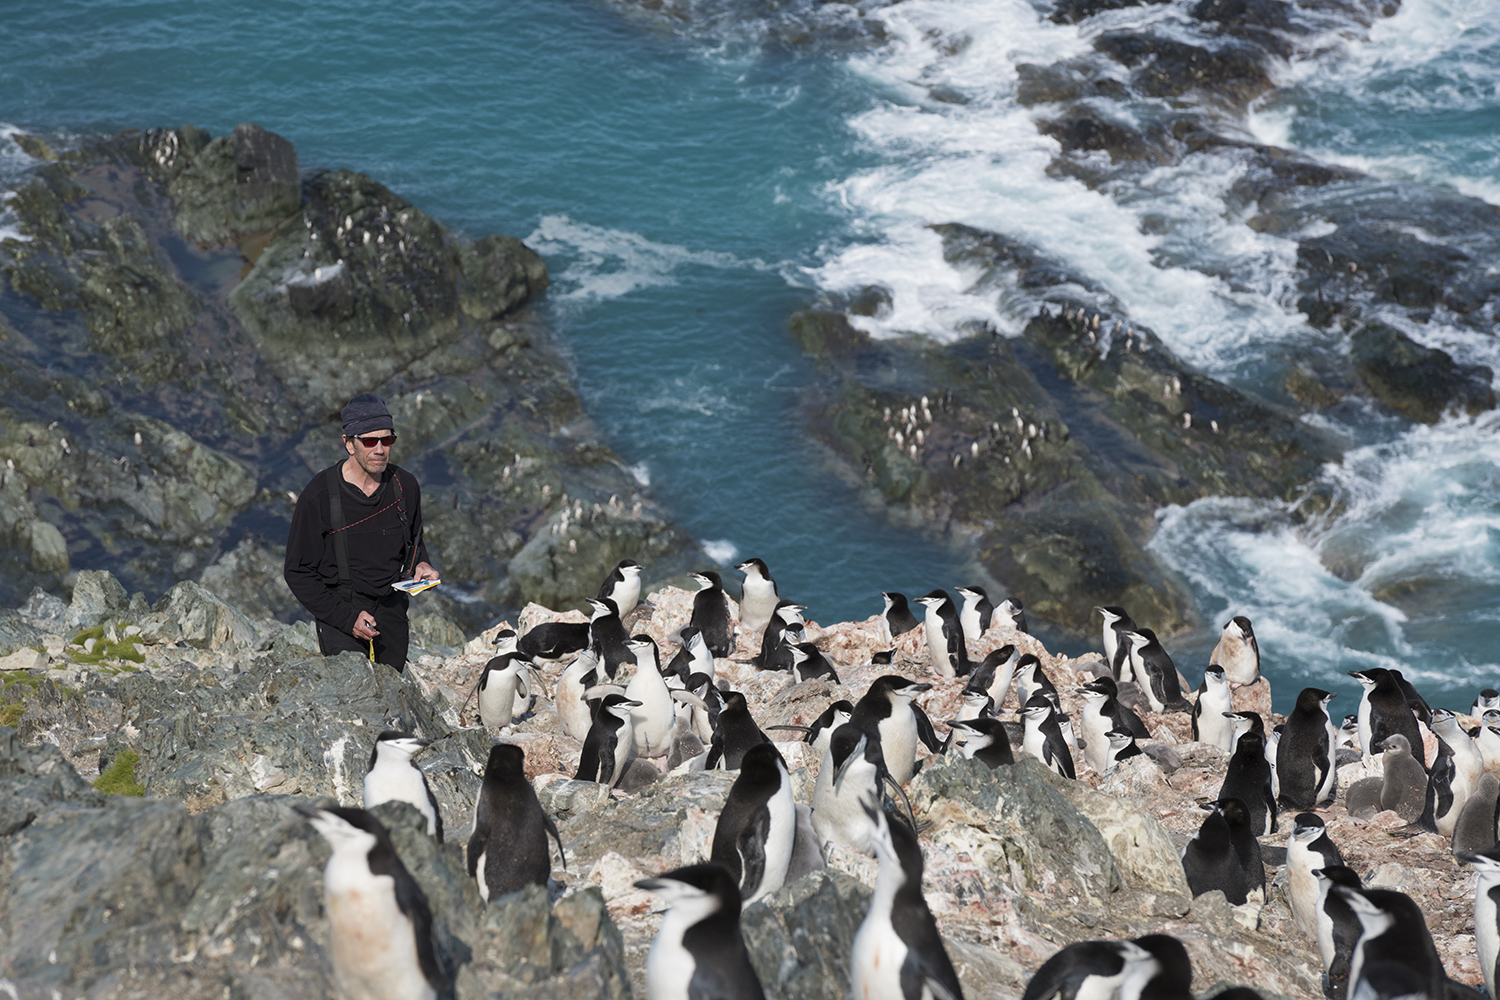 Lead scientist Steven Forrest from Stony Brook University counting chinstrap penguins on Elephant Island, Antarctica.Elephant Island is home to one of the worldâs largest Chinstrap Penguin populations but the scientists conducting the census finds the number of chinstrap penguins on Elephant Island has dropped almost 60% since the last survey in 1971. Penguins main source of food is krill and the warming waters have reduced the sea ice and the phytoplankton that krill depend upon.